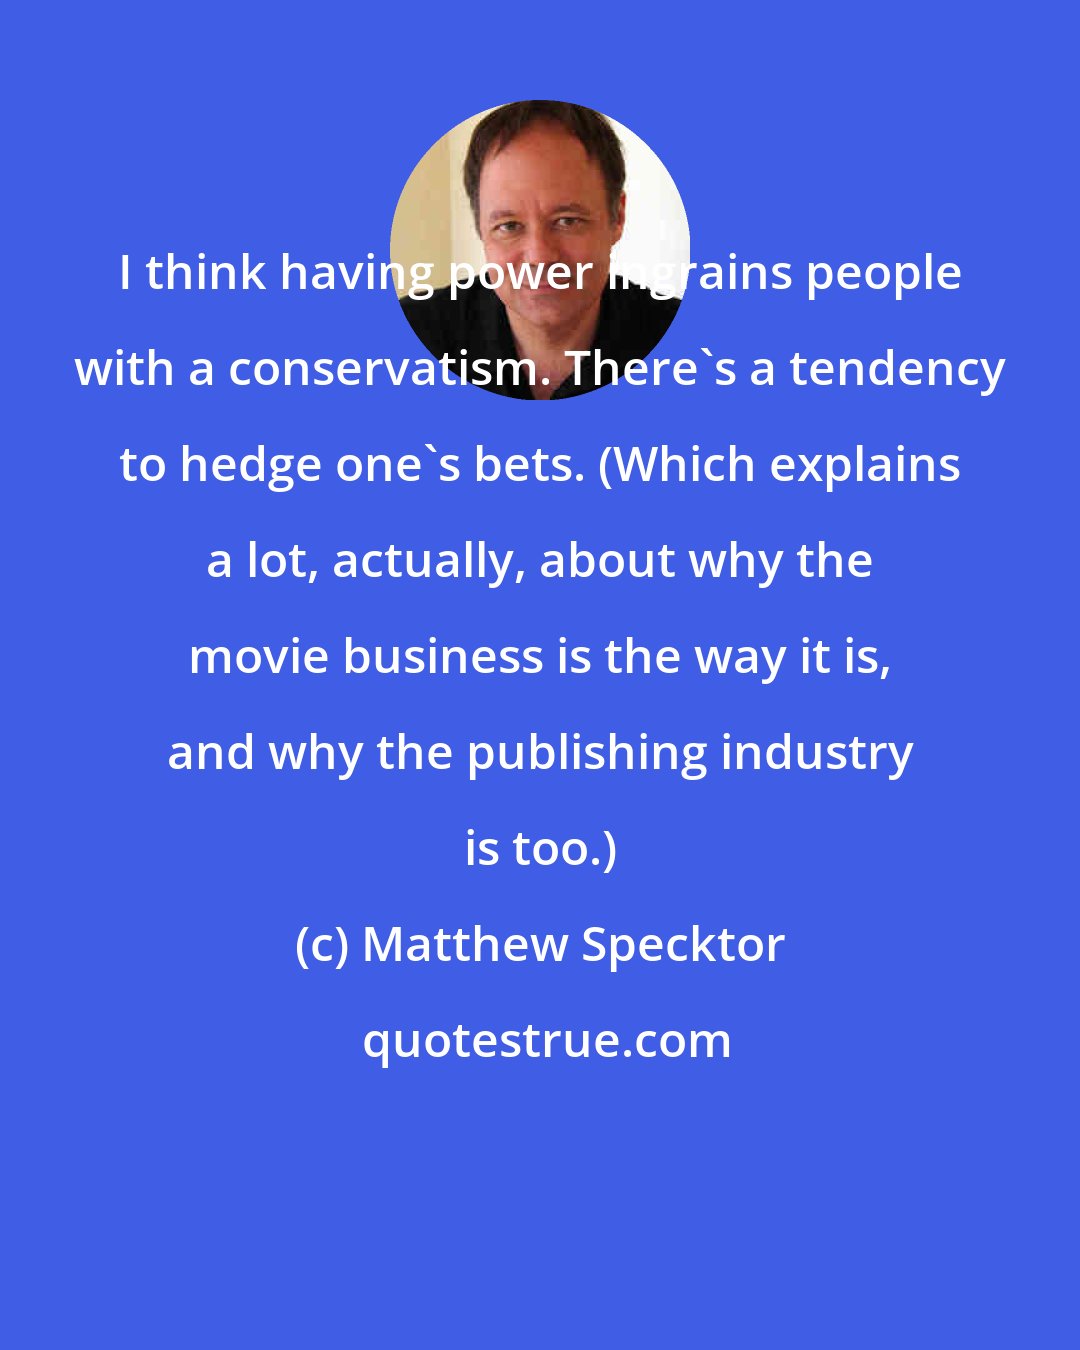 Matthew Specktor: I think having power ingrains people with a conservatism. There's a tendency to hedge one's bets. (Which explains a lot, actually, about why the movie business is the way it is, and why the publishing industry is too.)